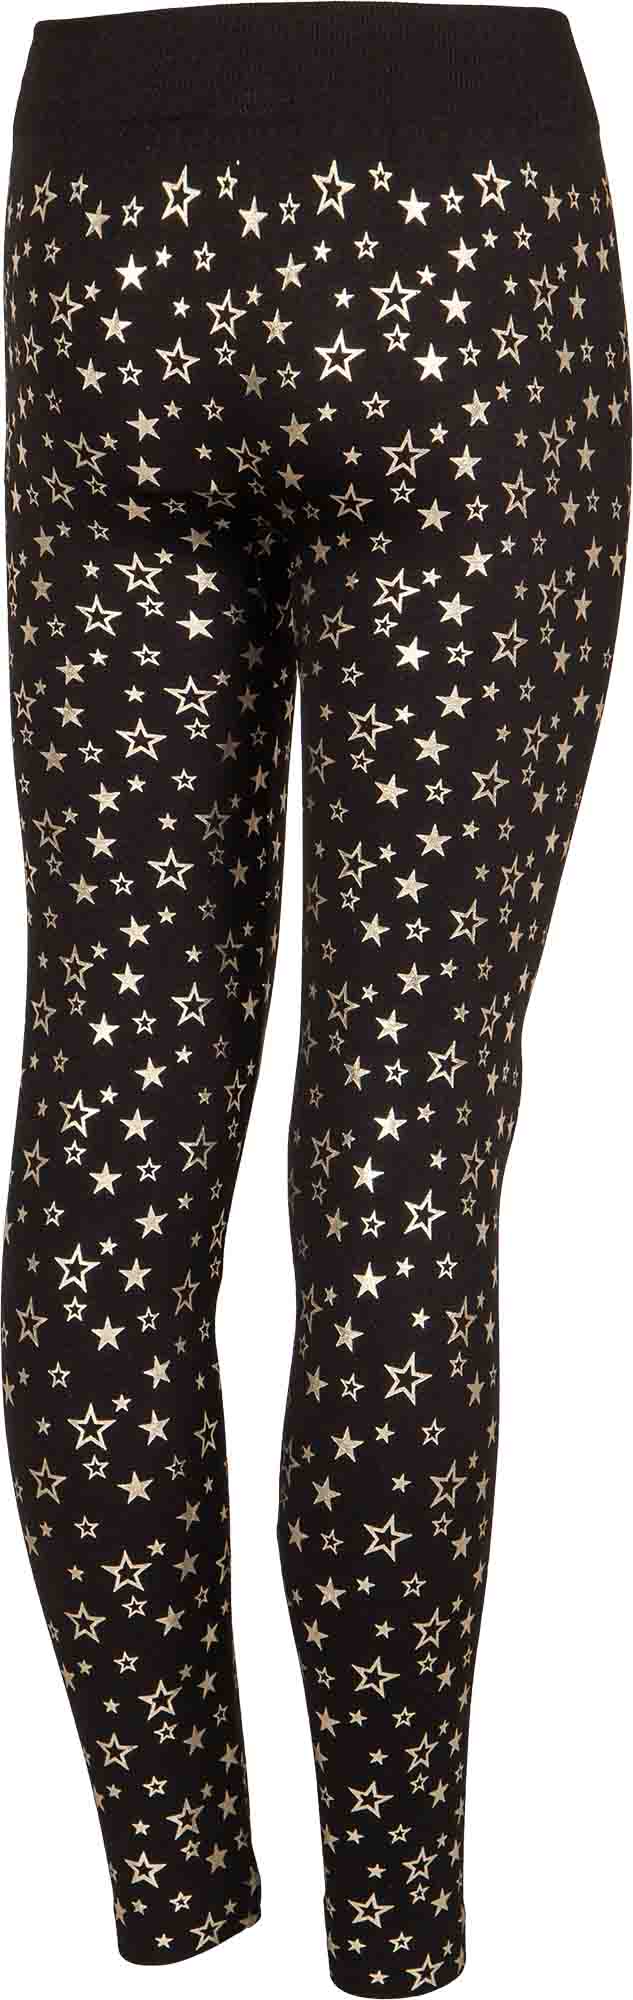 Girls’ insulated tights